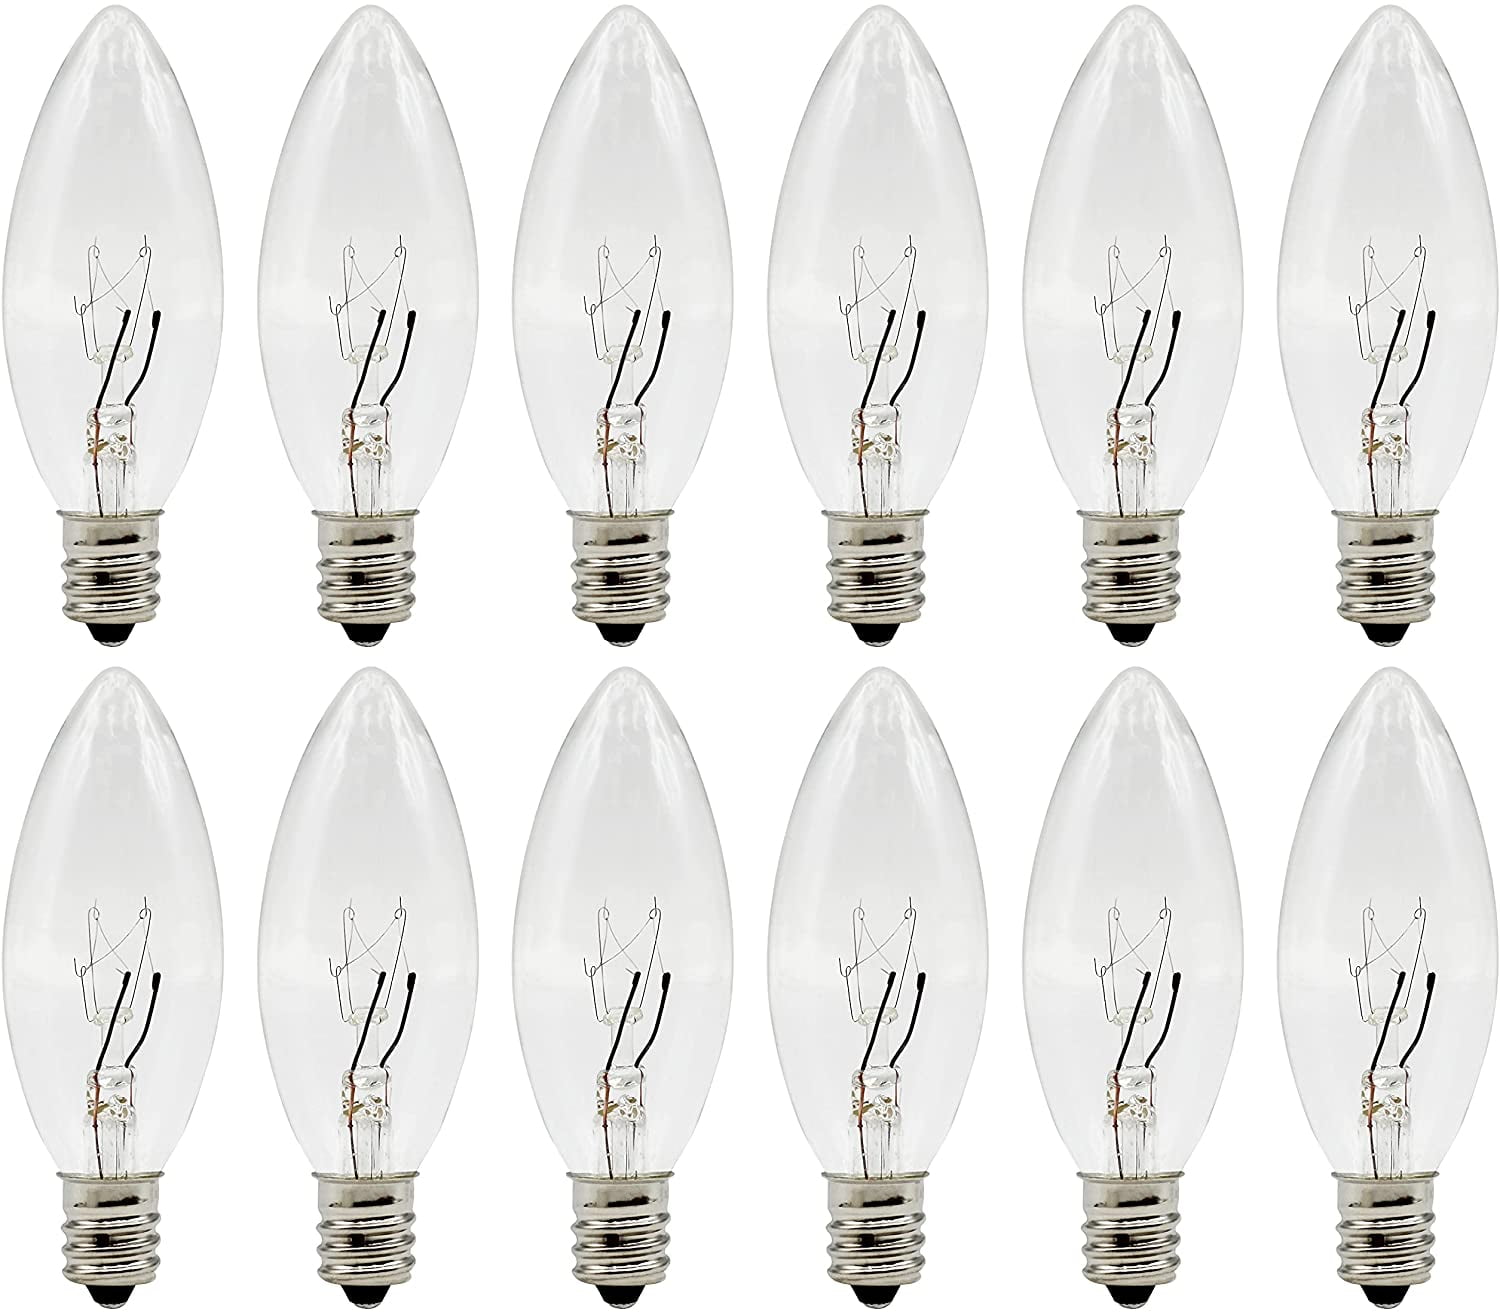 Window Candles 7W 12 Pack Replacement Light Bulbs for Electric Candle Lamps 